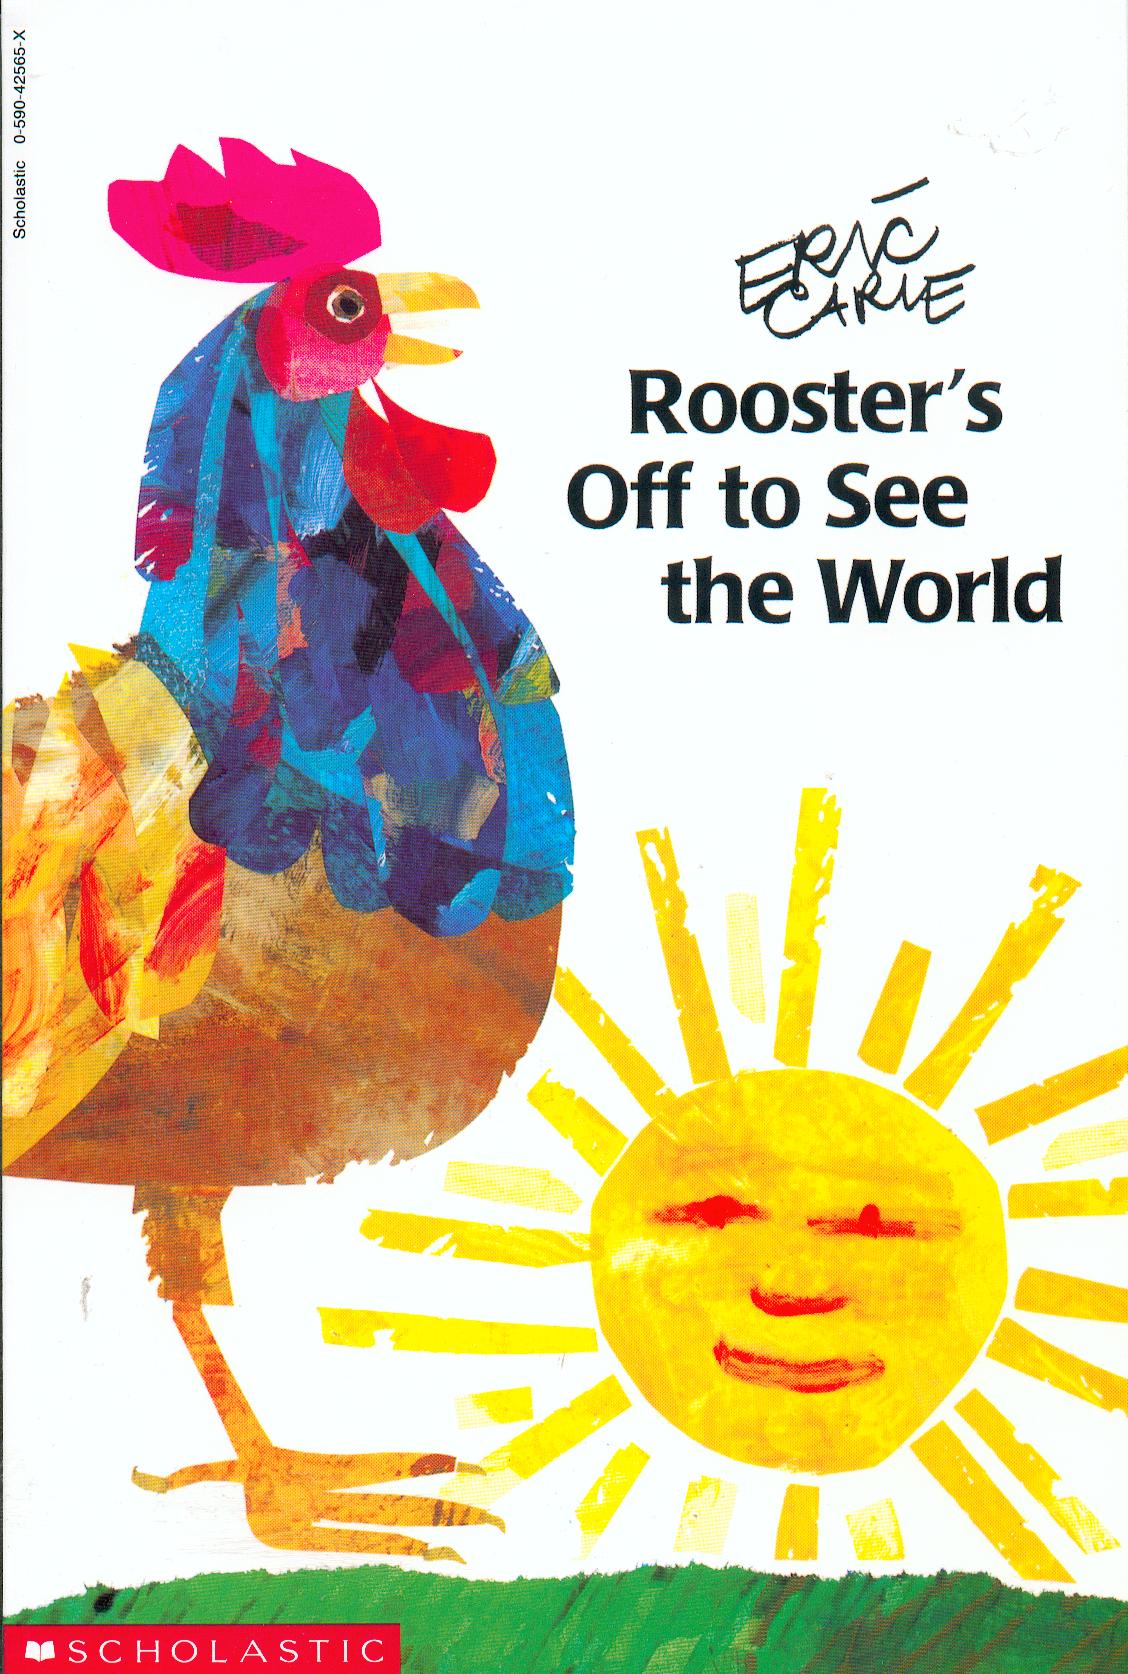 Rooster's off to see the world / Eric Carle.